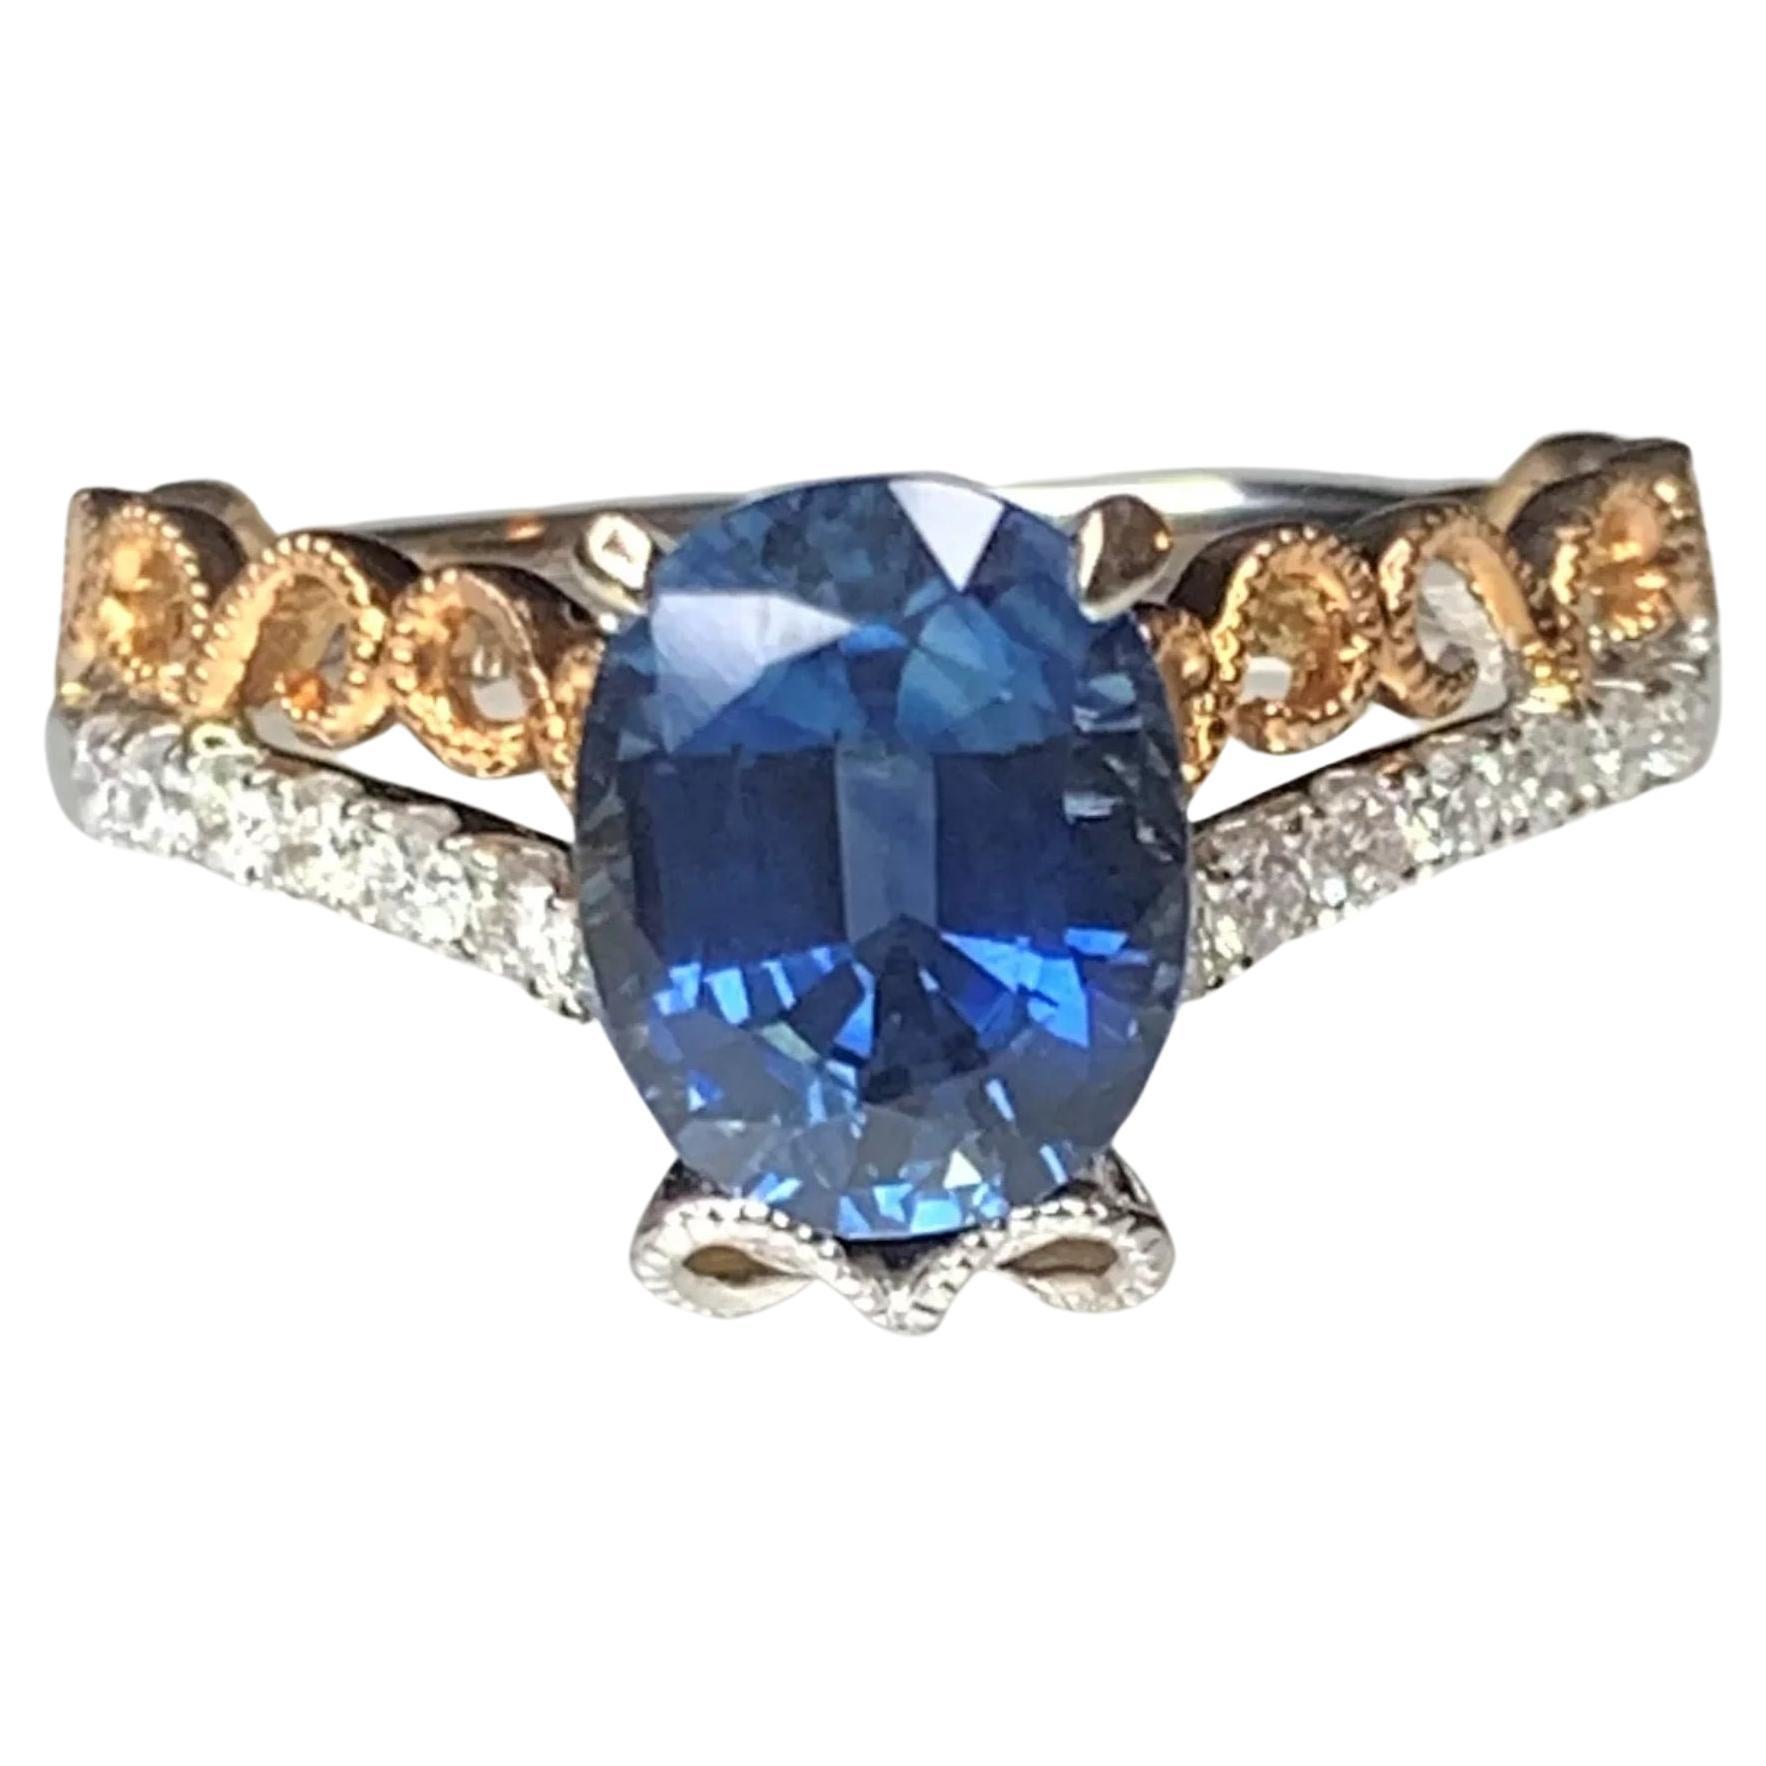 For Sale:  Oval Cut Blue Sapphire Diamond Engagement Ring Art Deco Sapphire Bridal Ring